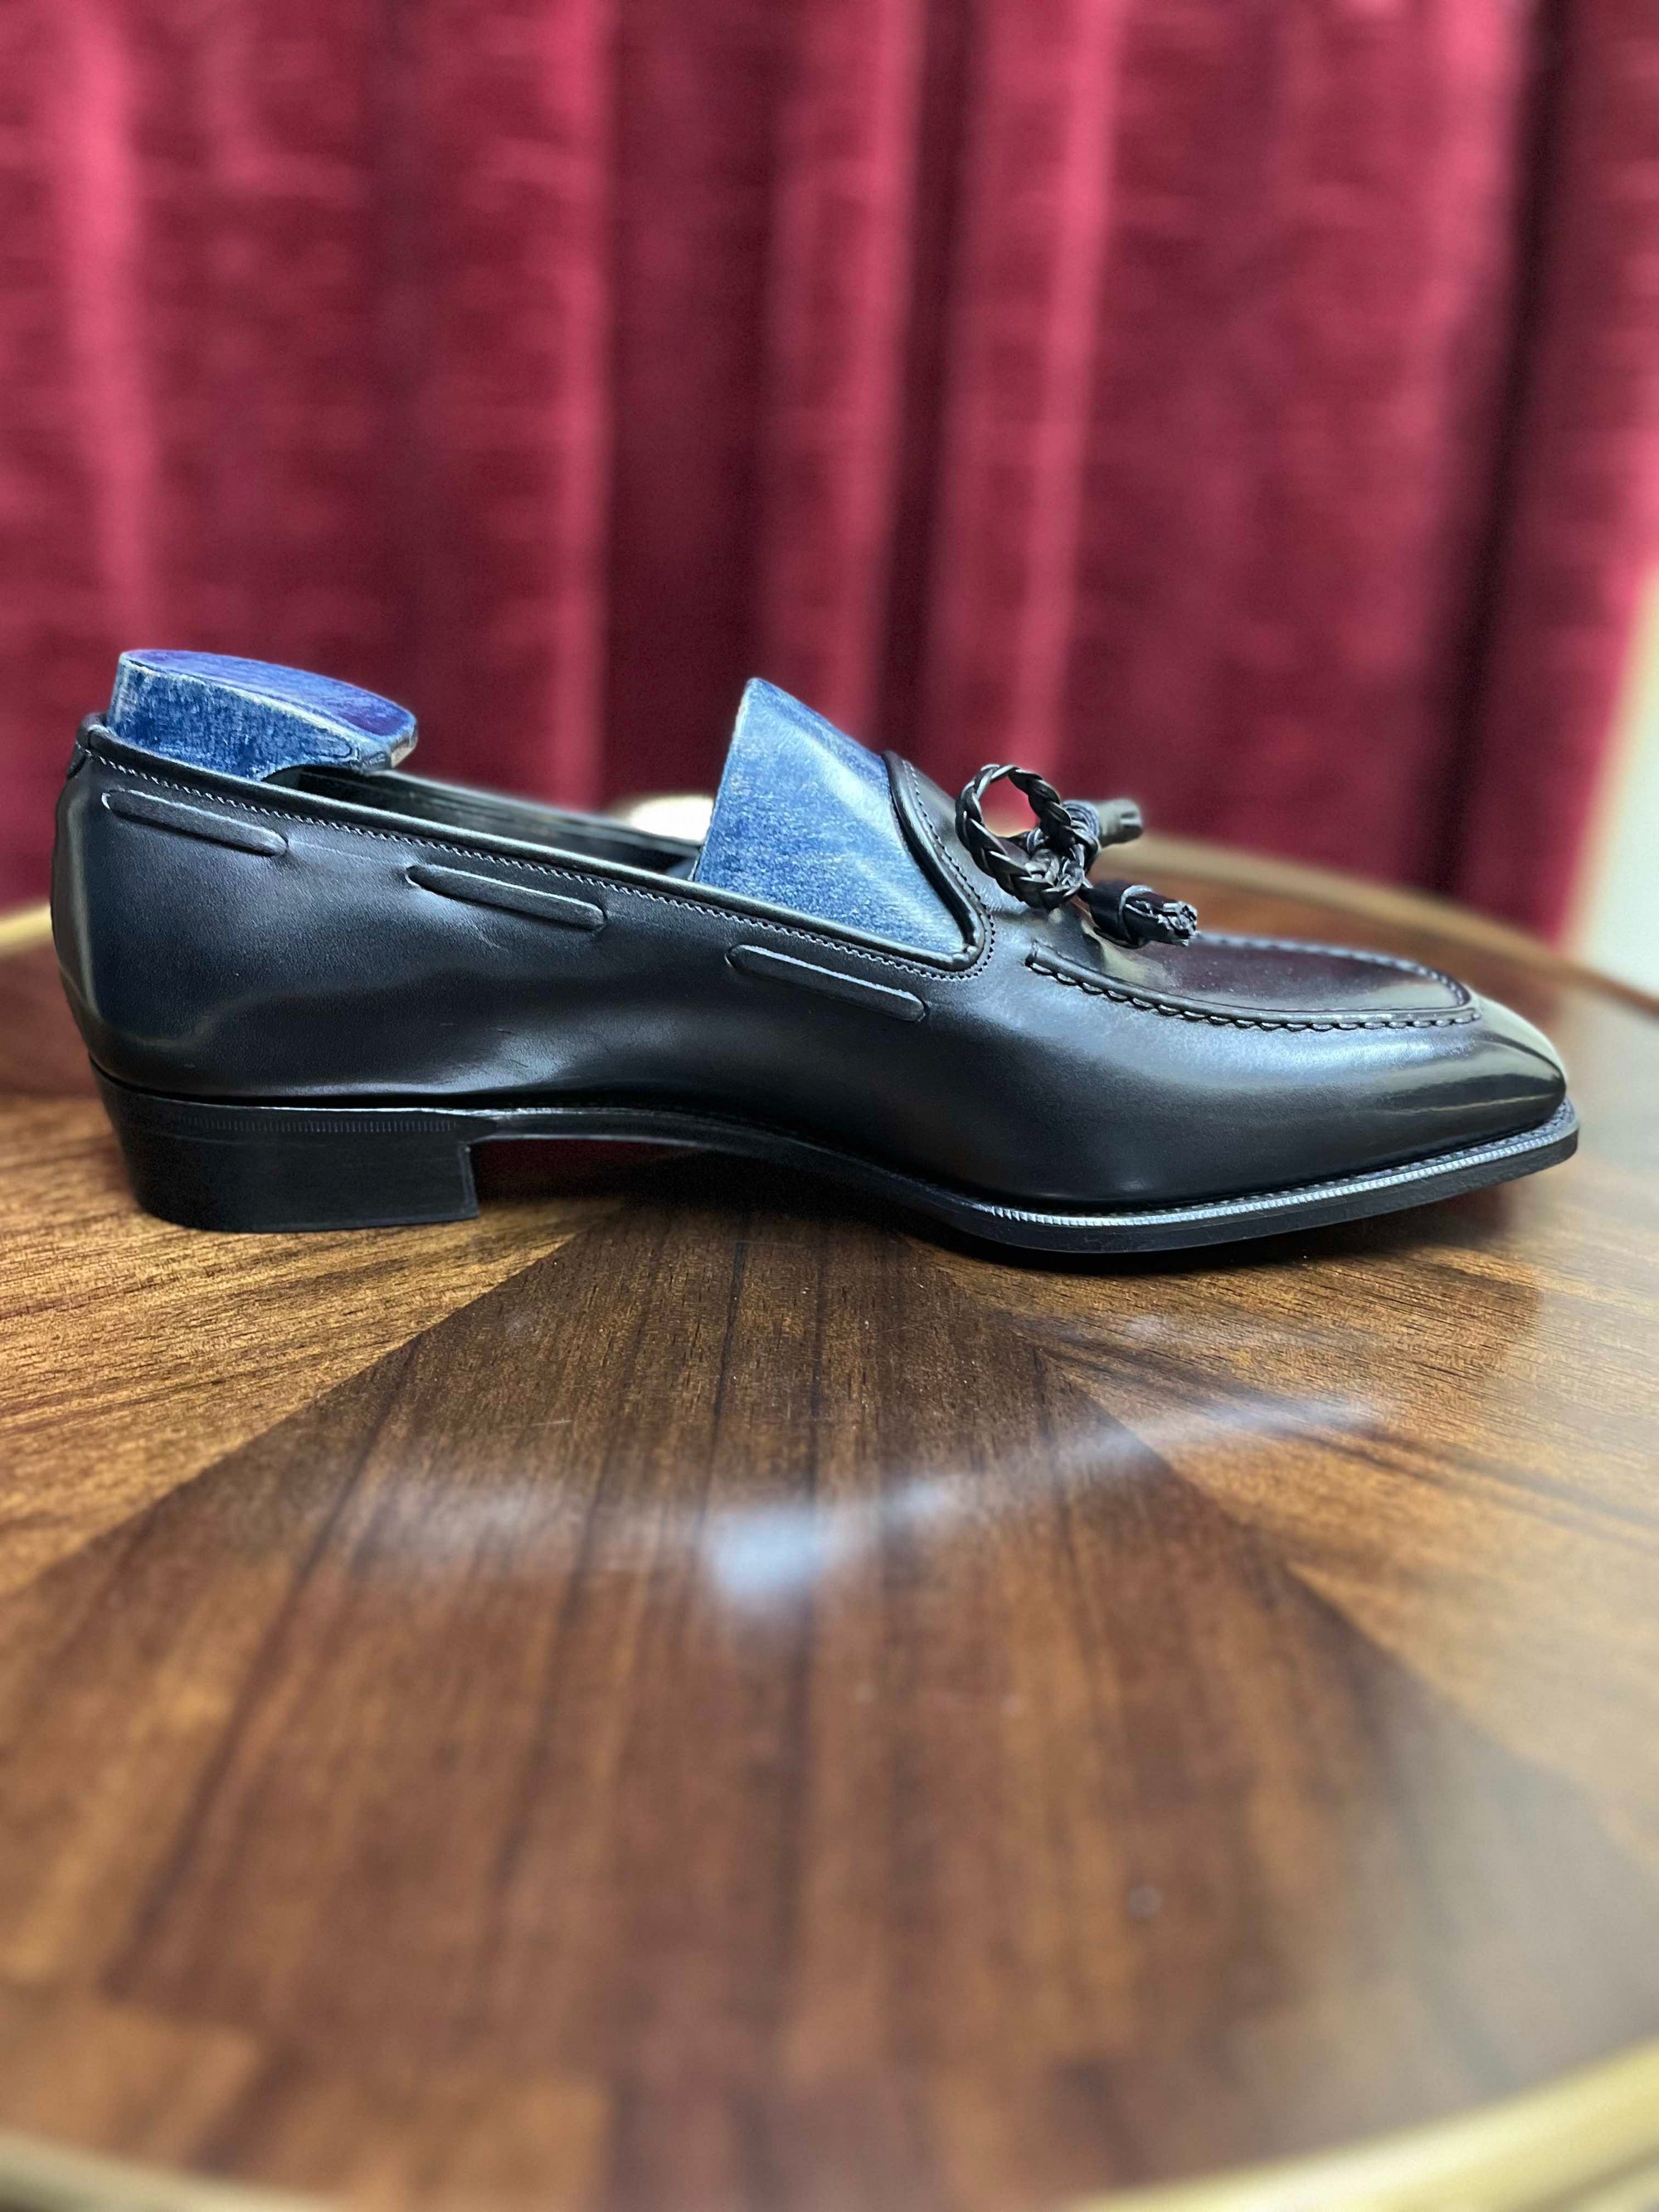 A Anthony Cleverley Baron de Rede Black Casual Loafer, UK 9.0 Wide on a table from KirbyAllison.com.